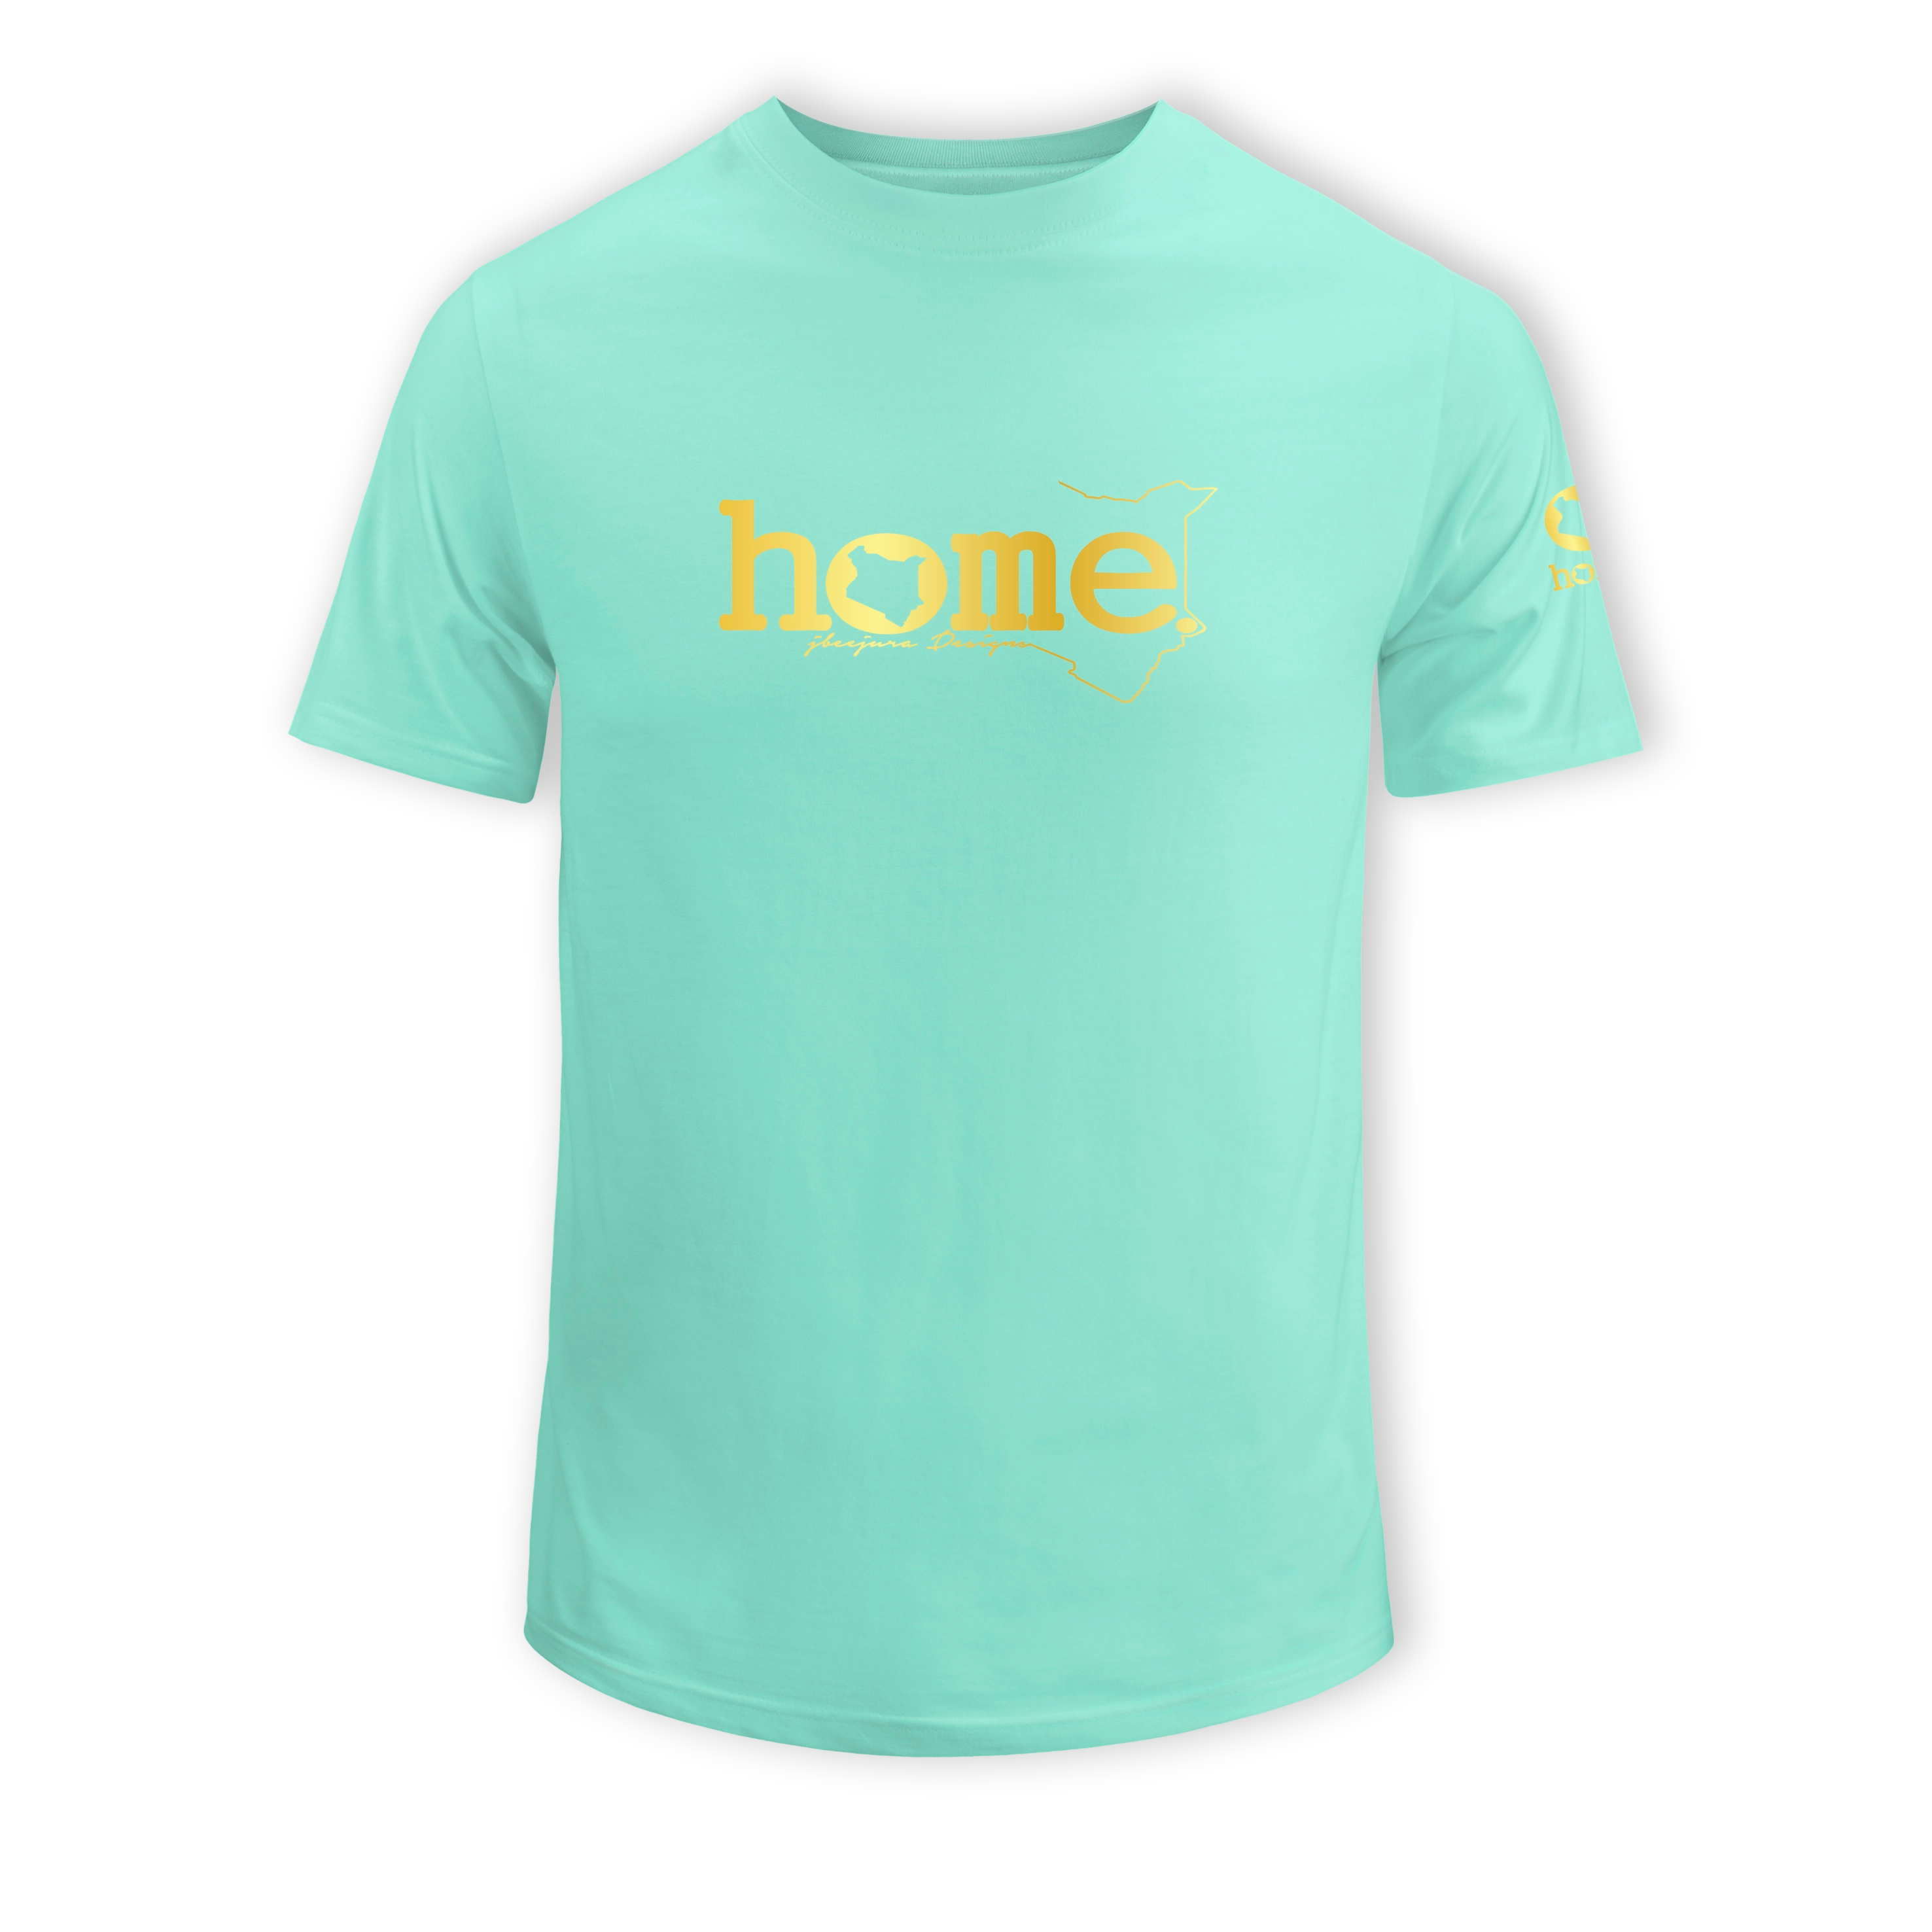 home_254 KIDS SHORT-SLEEVED TURQUOISE GREEN T-SHIRT WITH A GOLD CLASSIC WORDS PRINT – COTTON PLUS FABRIC